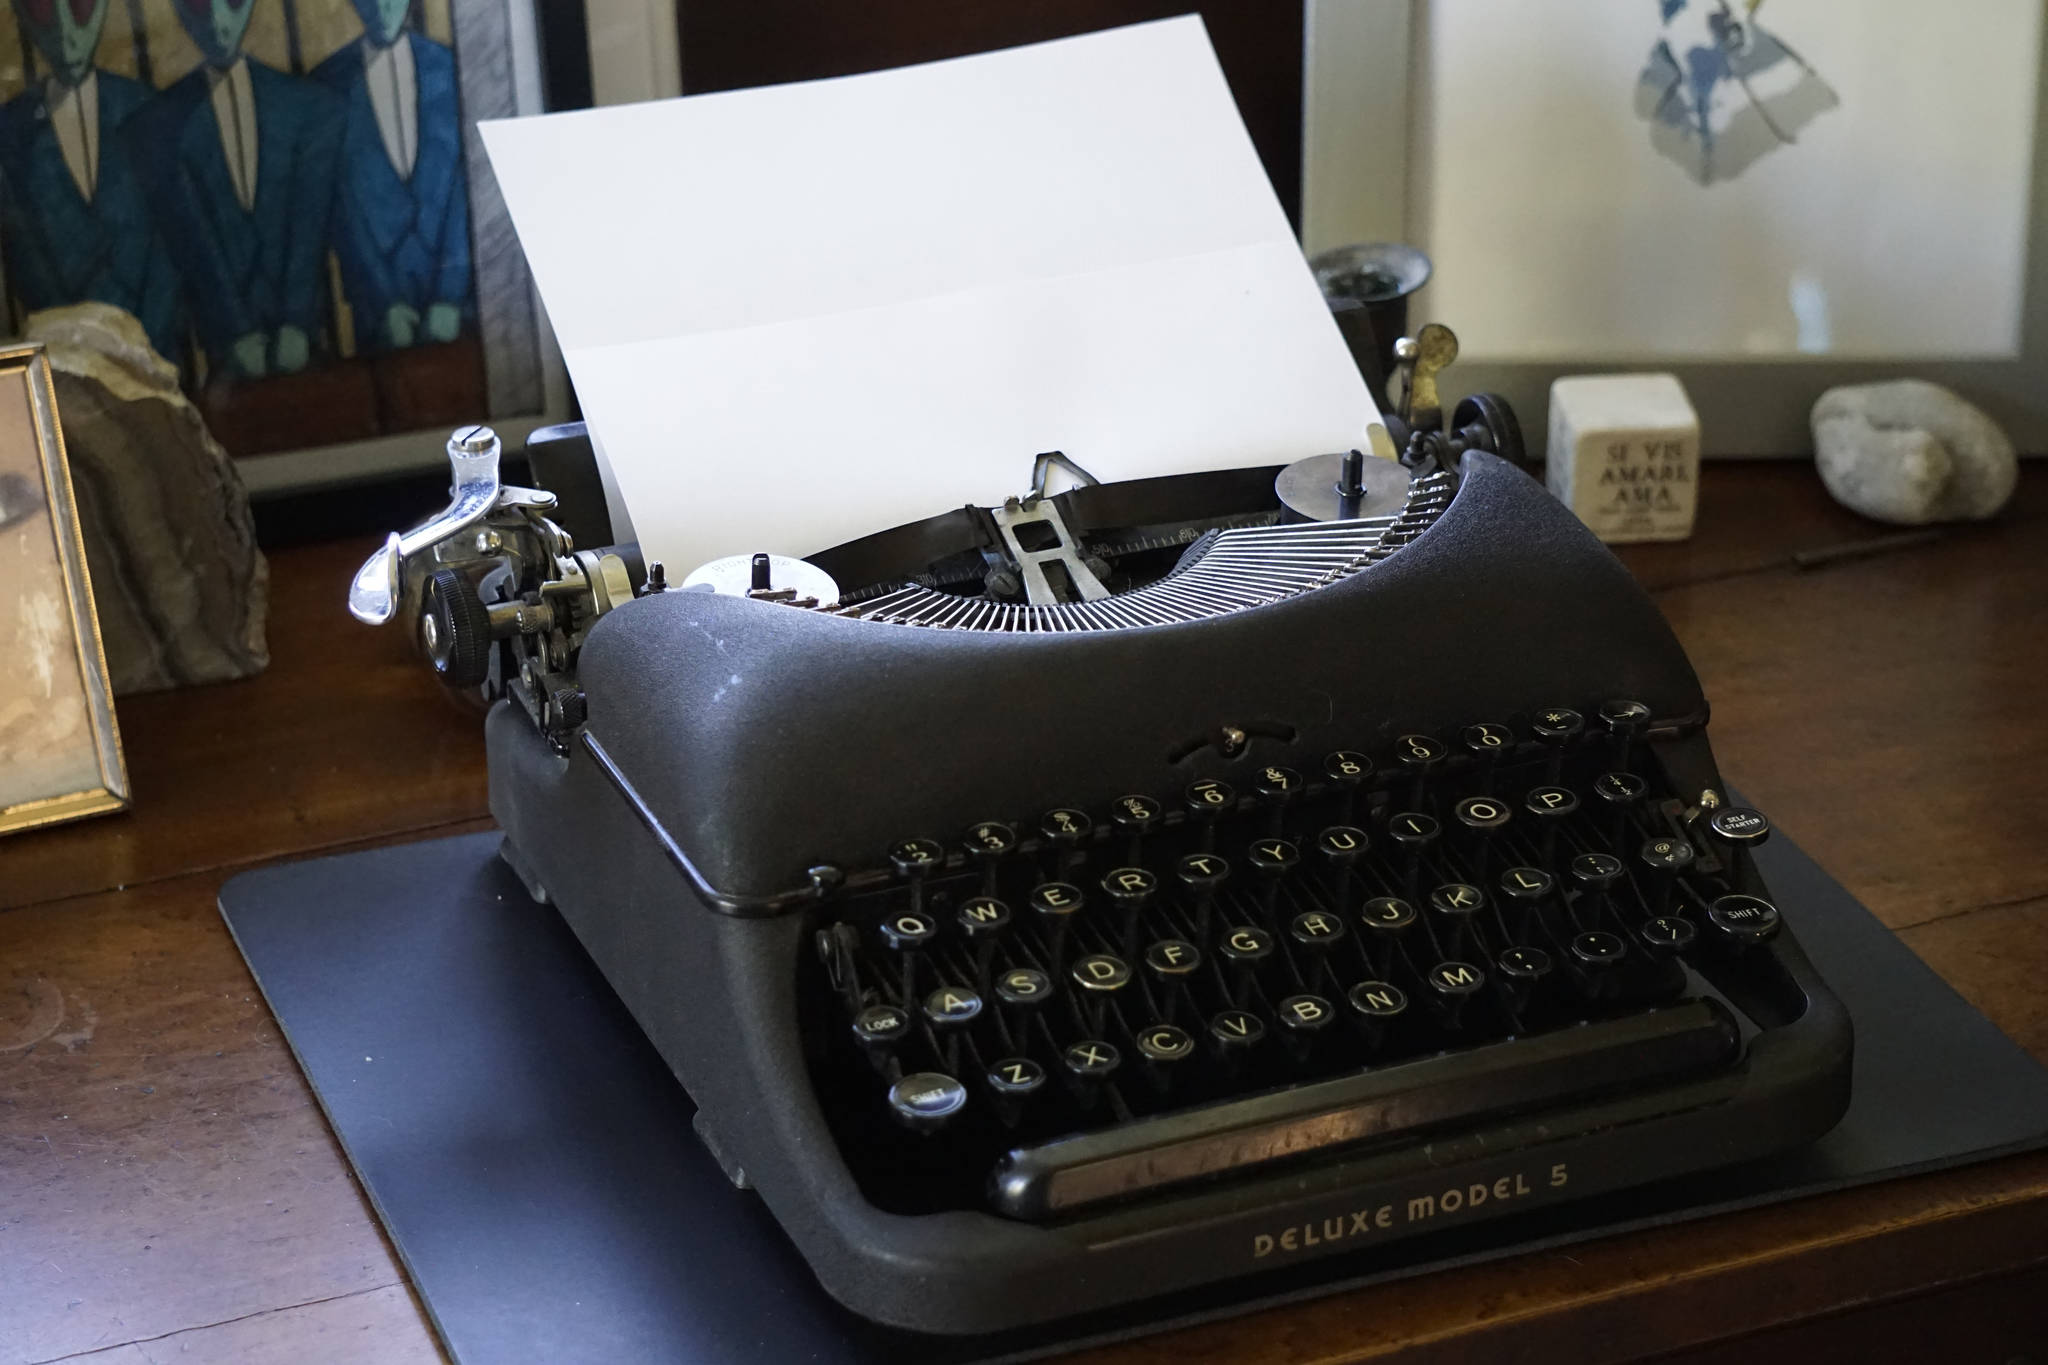 A Remington Deluxe Model 5 typewriter sits on a desk on Saturday, June 9, 2018, in Homer, Alaska. (Photo by Michael Armstrong/Homer News)